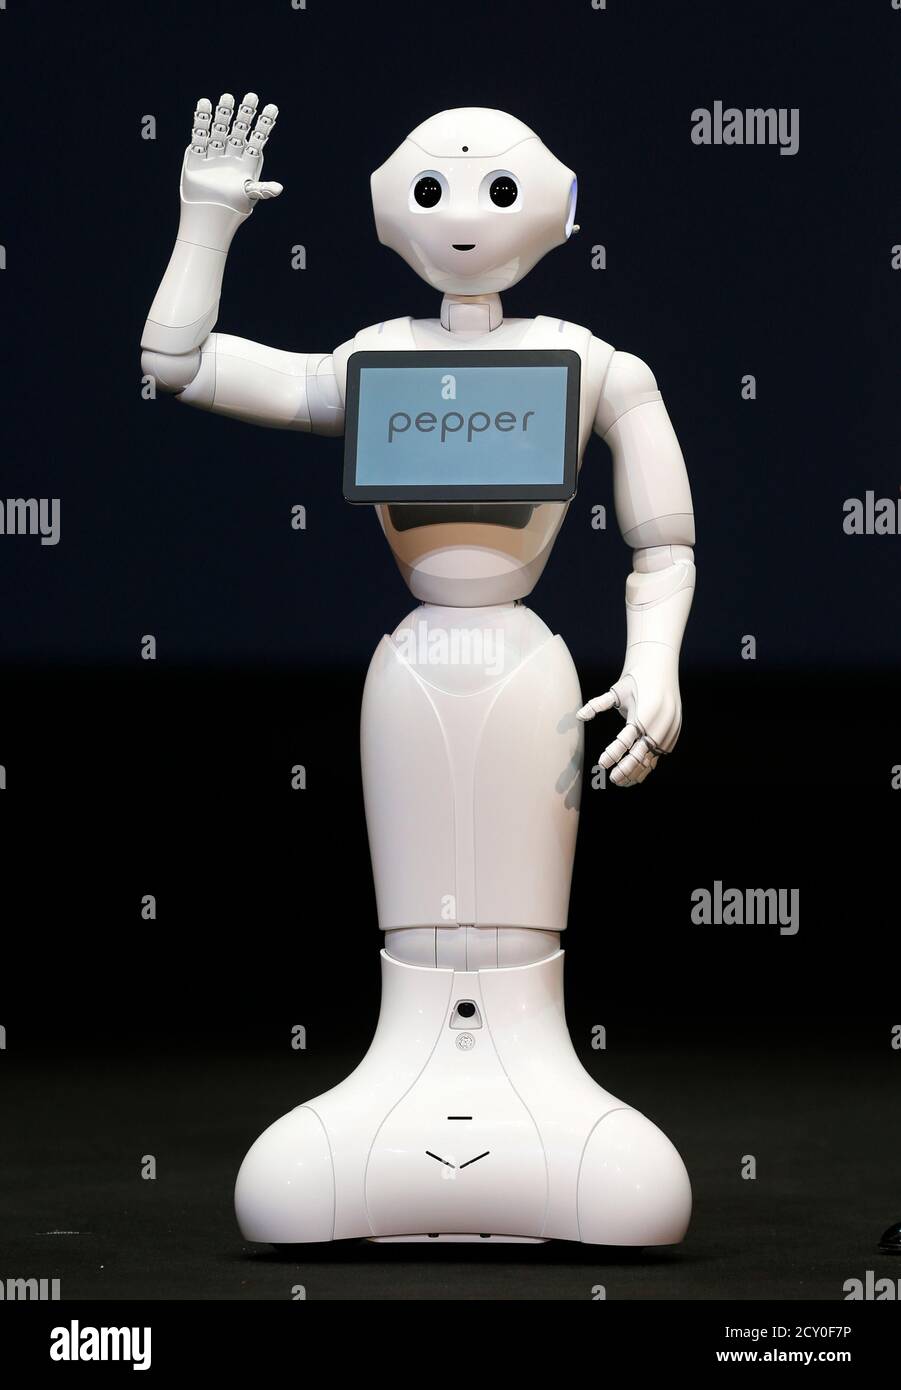 SoftBank Corp. unveils human-like robots named 'pepper' at the company's  news conference in Urayasu, east of Tokyo June 5, 2014. Japan's SoftBank  Corp is developing human-like robots which it will use to